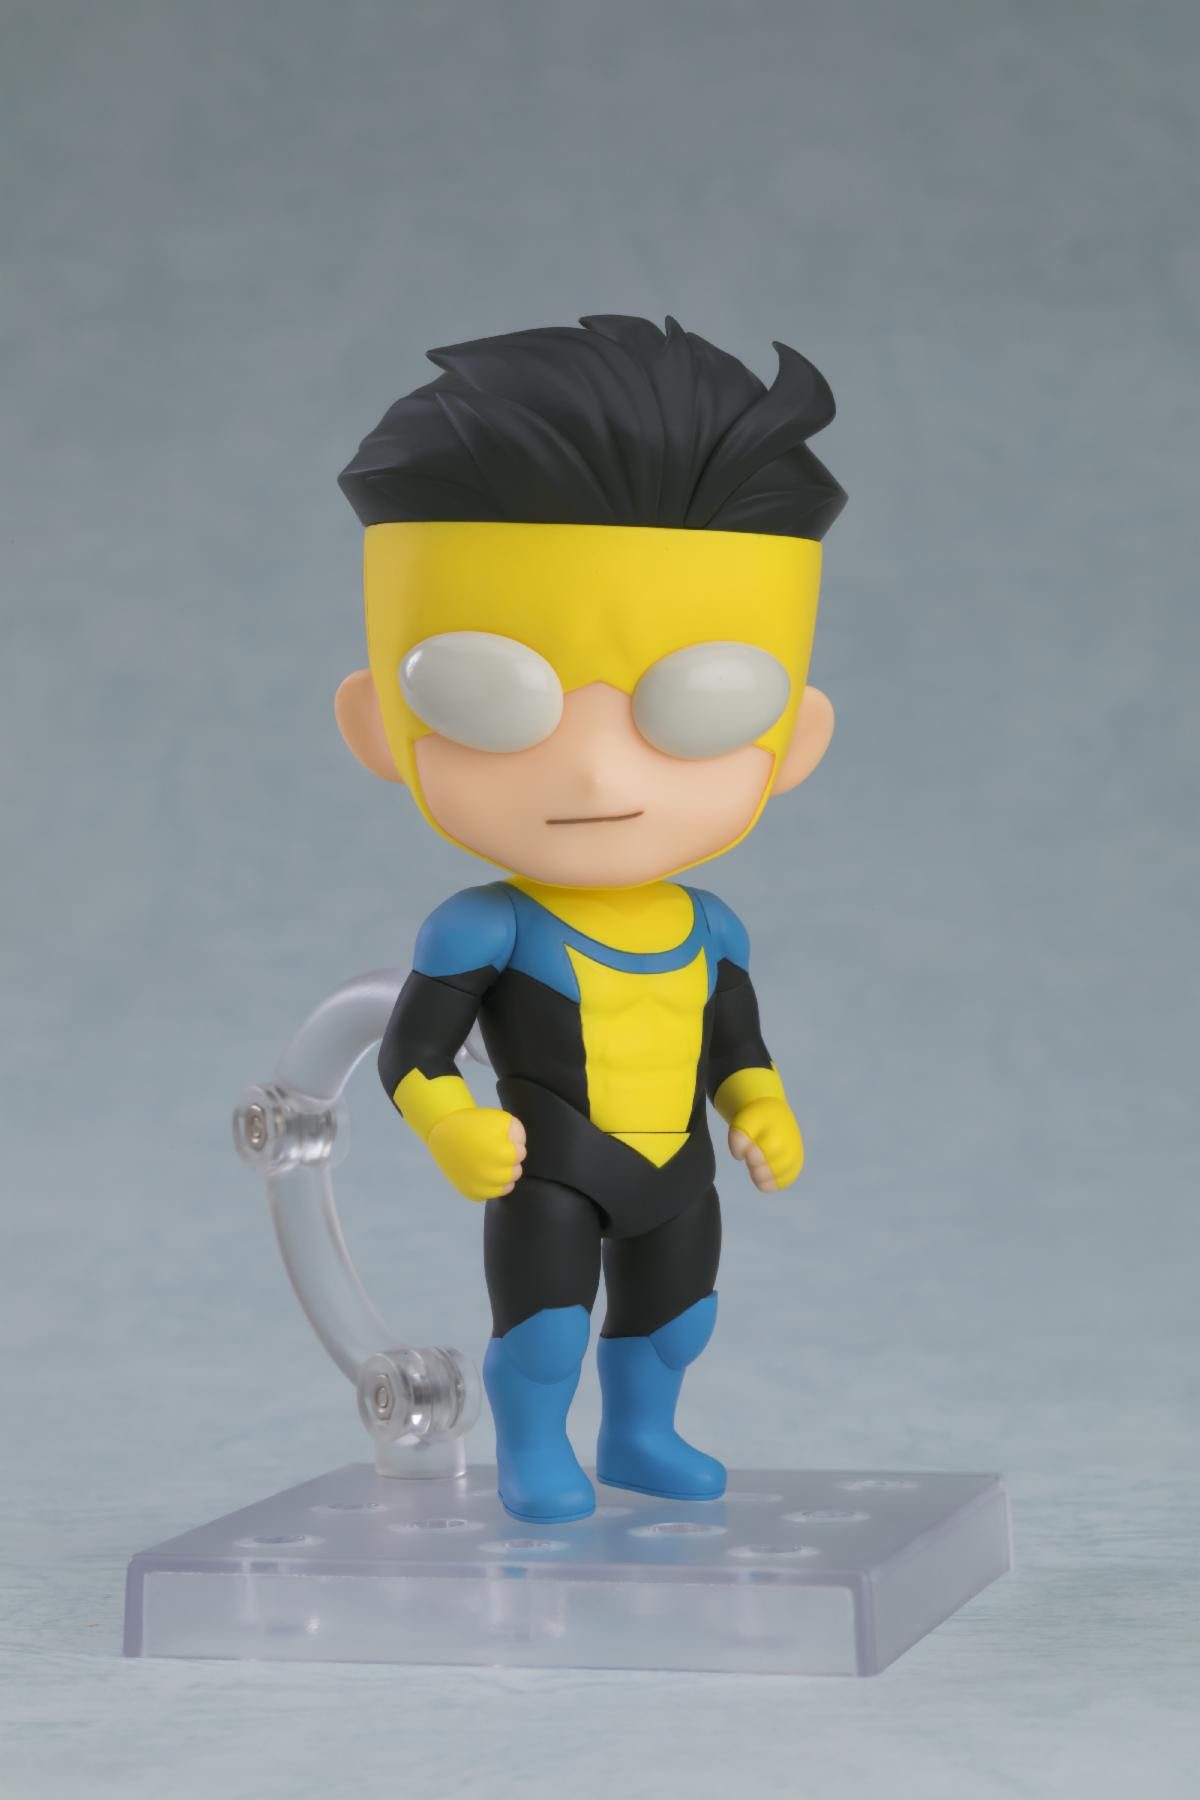 Invincible Nendoroid by Good Smile